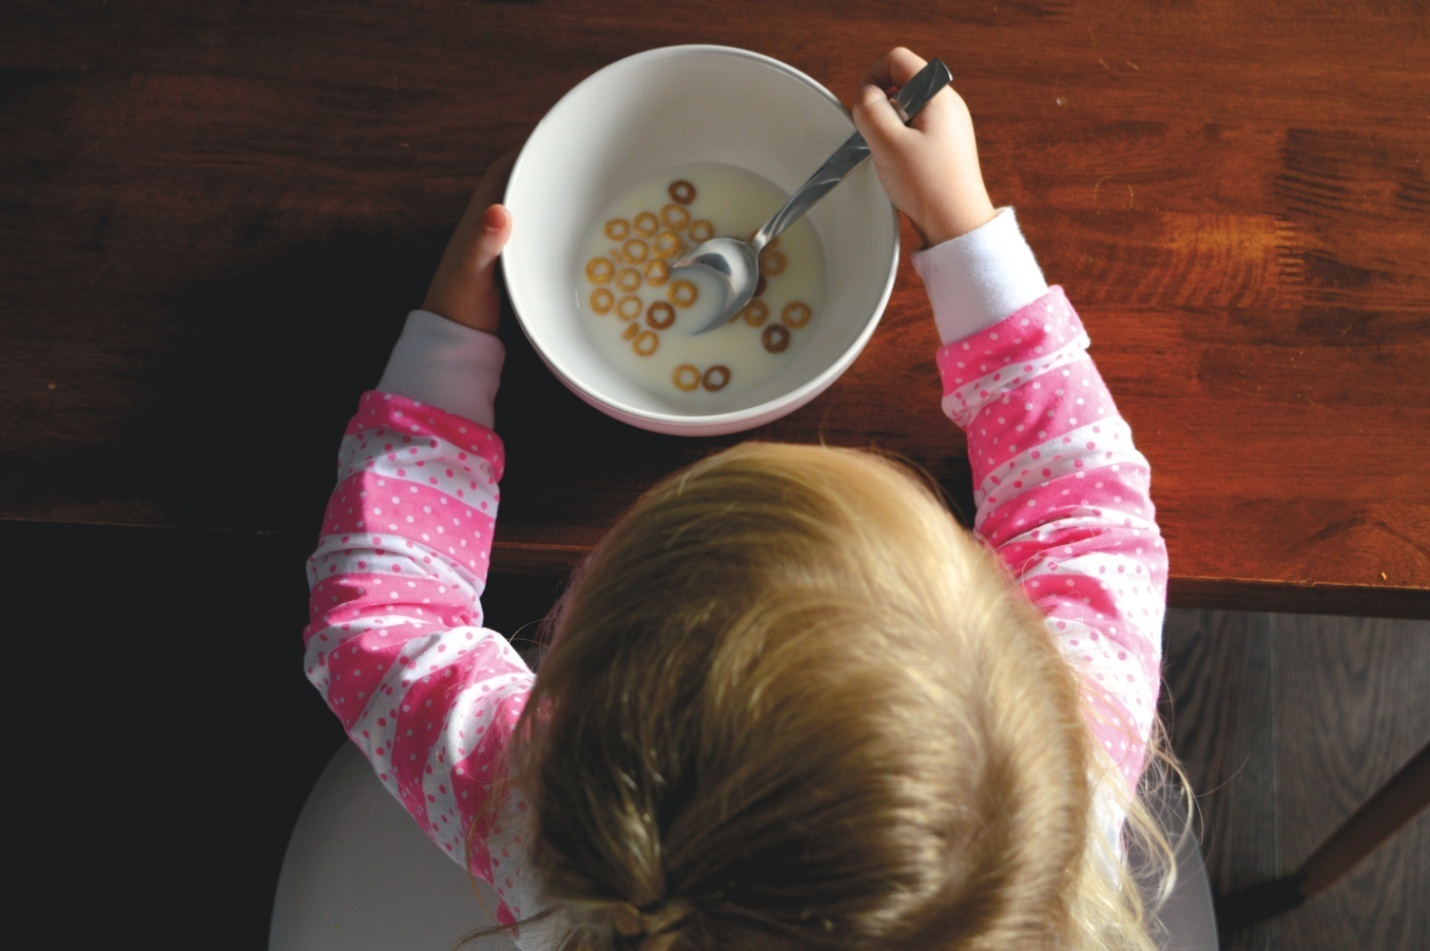 A kid eating a bowl of cereal